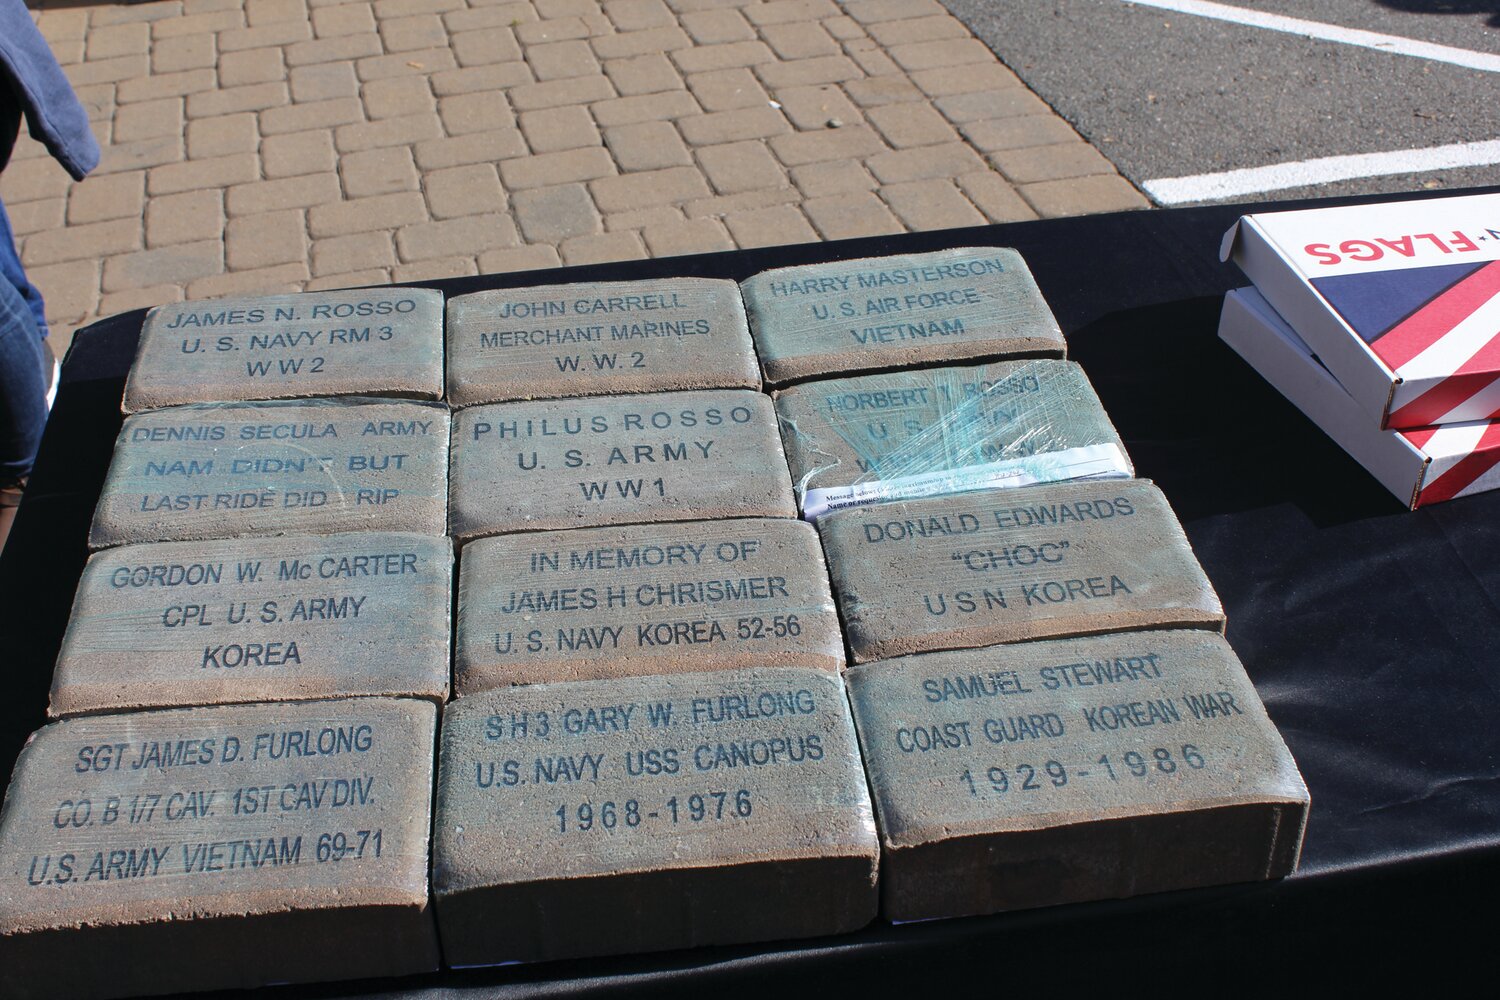 A memorial pavers program recognizes local veterans in perpetuity from the community and veteran organizations. The pavers are installed at the Lambertville Veterans building. This is an ongoing program open all year – 13 new installations were recognized this year.